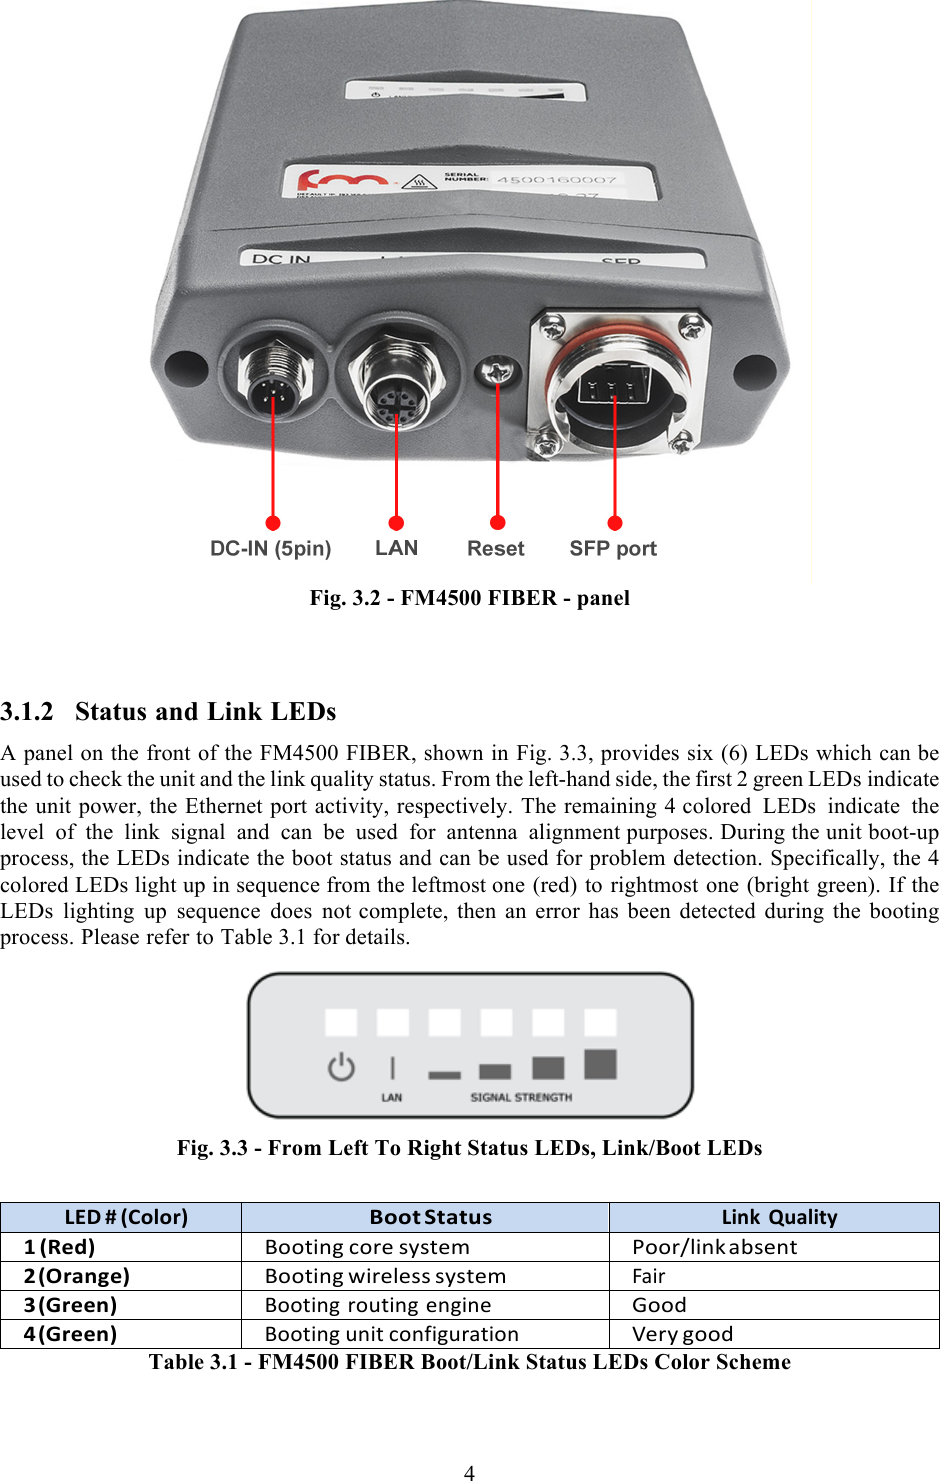  4   Fig. 3.2 - FM4500 FIBER - panel  3.1.2 Status and Link LEDs A panel on the front of the FM4500 FIBER, shown in Fig. 3.3, provides six (6) LEDs which can be used to check the unit and the link quality status. From the left-hand side, the first 2 green LEDs indicate the unit power, the Ethernet port activity, respectively. The remaining 4 colored LEDs indicate the level of the link signal and can be used for antenna alignment purposes. During the unit boot-up process, the LEDs indicate the boot status and can be used for problem detection. Specifically, the 4 colored LEDs light up in sequence from the leftmost one (red) to rightmost one (bright green). If the LEDs lighting up sequence does not complete, then an error has been detected during the booting process. Please refer to Table 3.1 for details.    Fig. 3.3 - From Left To Right Status LEDs, Link/Boot LEDs  LED$#$(Color)!Boot$Status!Link$Quality!1$(Red)!&quot;##$%&amp;&apos;!(#)*!+,+$*-!.##)/0%&amp;1!23+*&amp;$!2$(Orange)!&quot;##$%&amp;&apos;!4%)*0*++!+,+$*-!52%)!3$(Green)!&quot;##$%&amp;&apos;!)#6$%&amp;&apos;!*&amp;&apos;%&amp;*!7##8!4$(Green)!&quot;##$%&amp;&apos;!6&amp;%$!(#&amp;9%&apos;6)2$%#&amp;!:*),!&apos;##8!Table 3.1 - FM4500 FIBER Boot/Link Status LEDs Color Scheme  